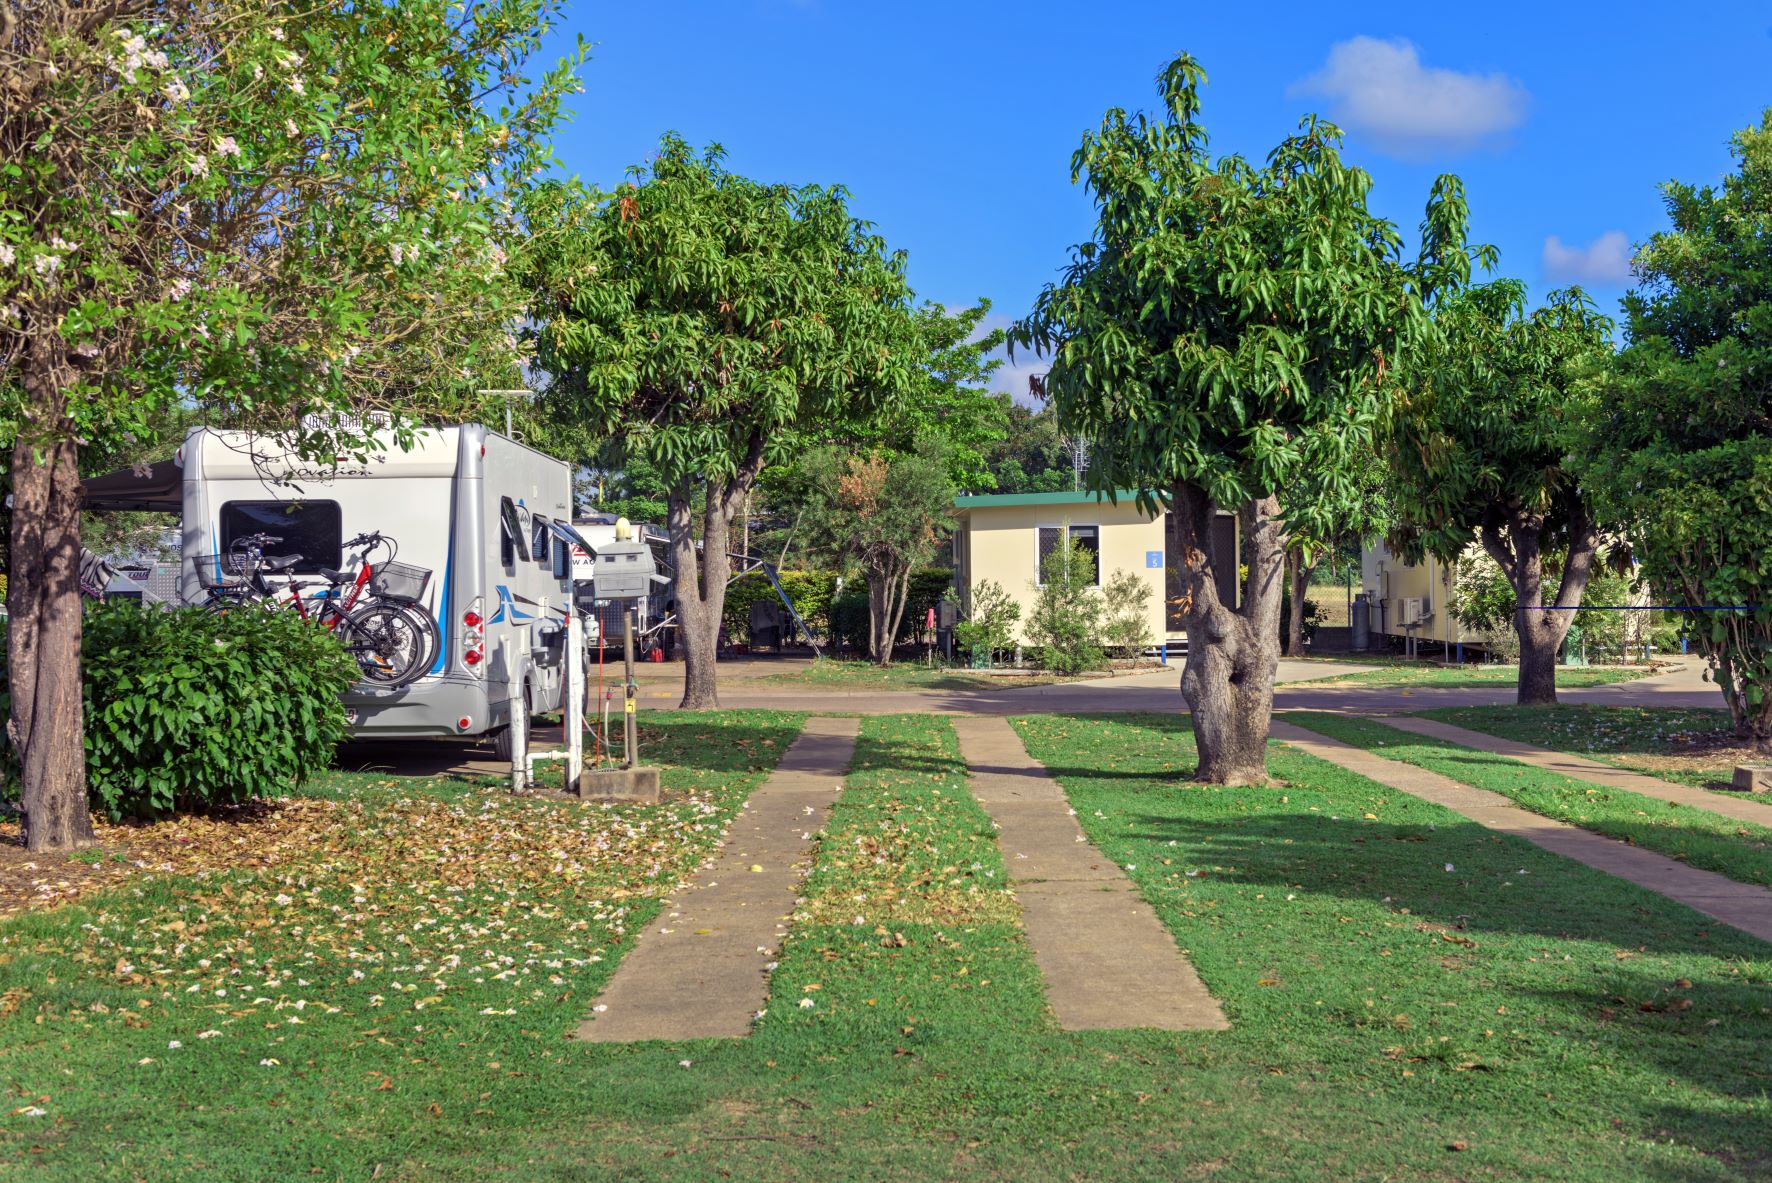 The best holiday parks in australia drive through campground